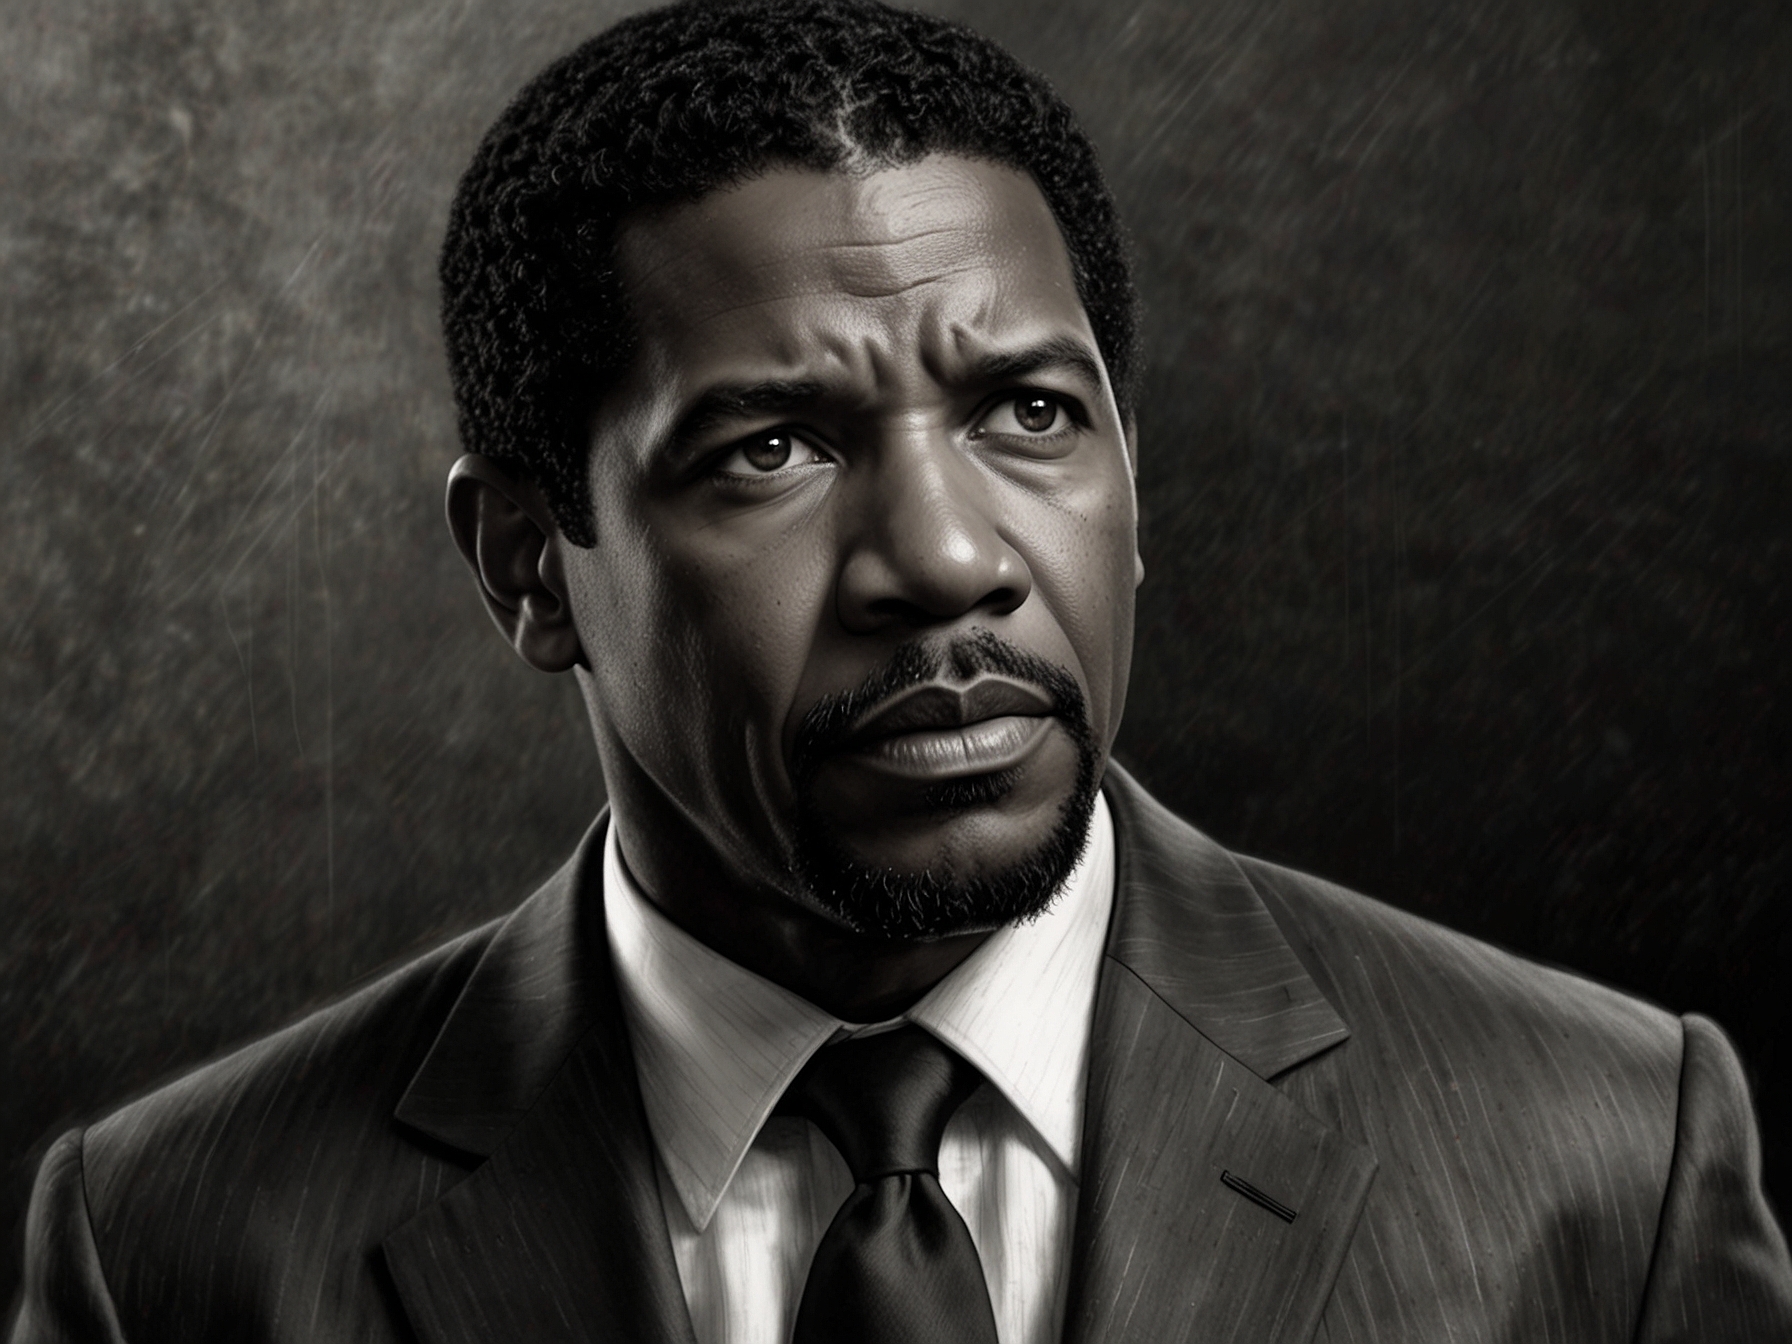 Denzel Washington in a compelling scene from his latest film, showcasing the depth of his acting prowess and reinforcing the buzz around his potential Best Actor nomination at the upcoming Oscars.